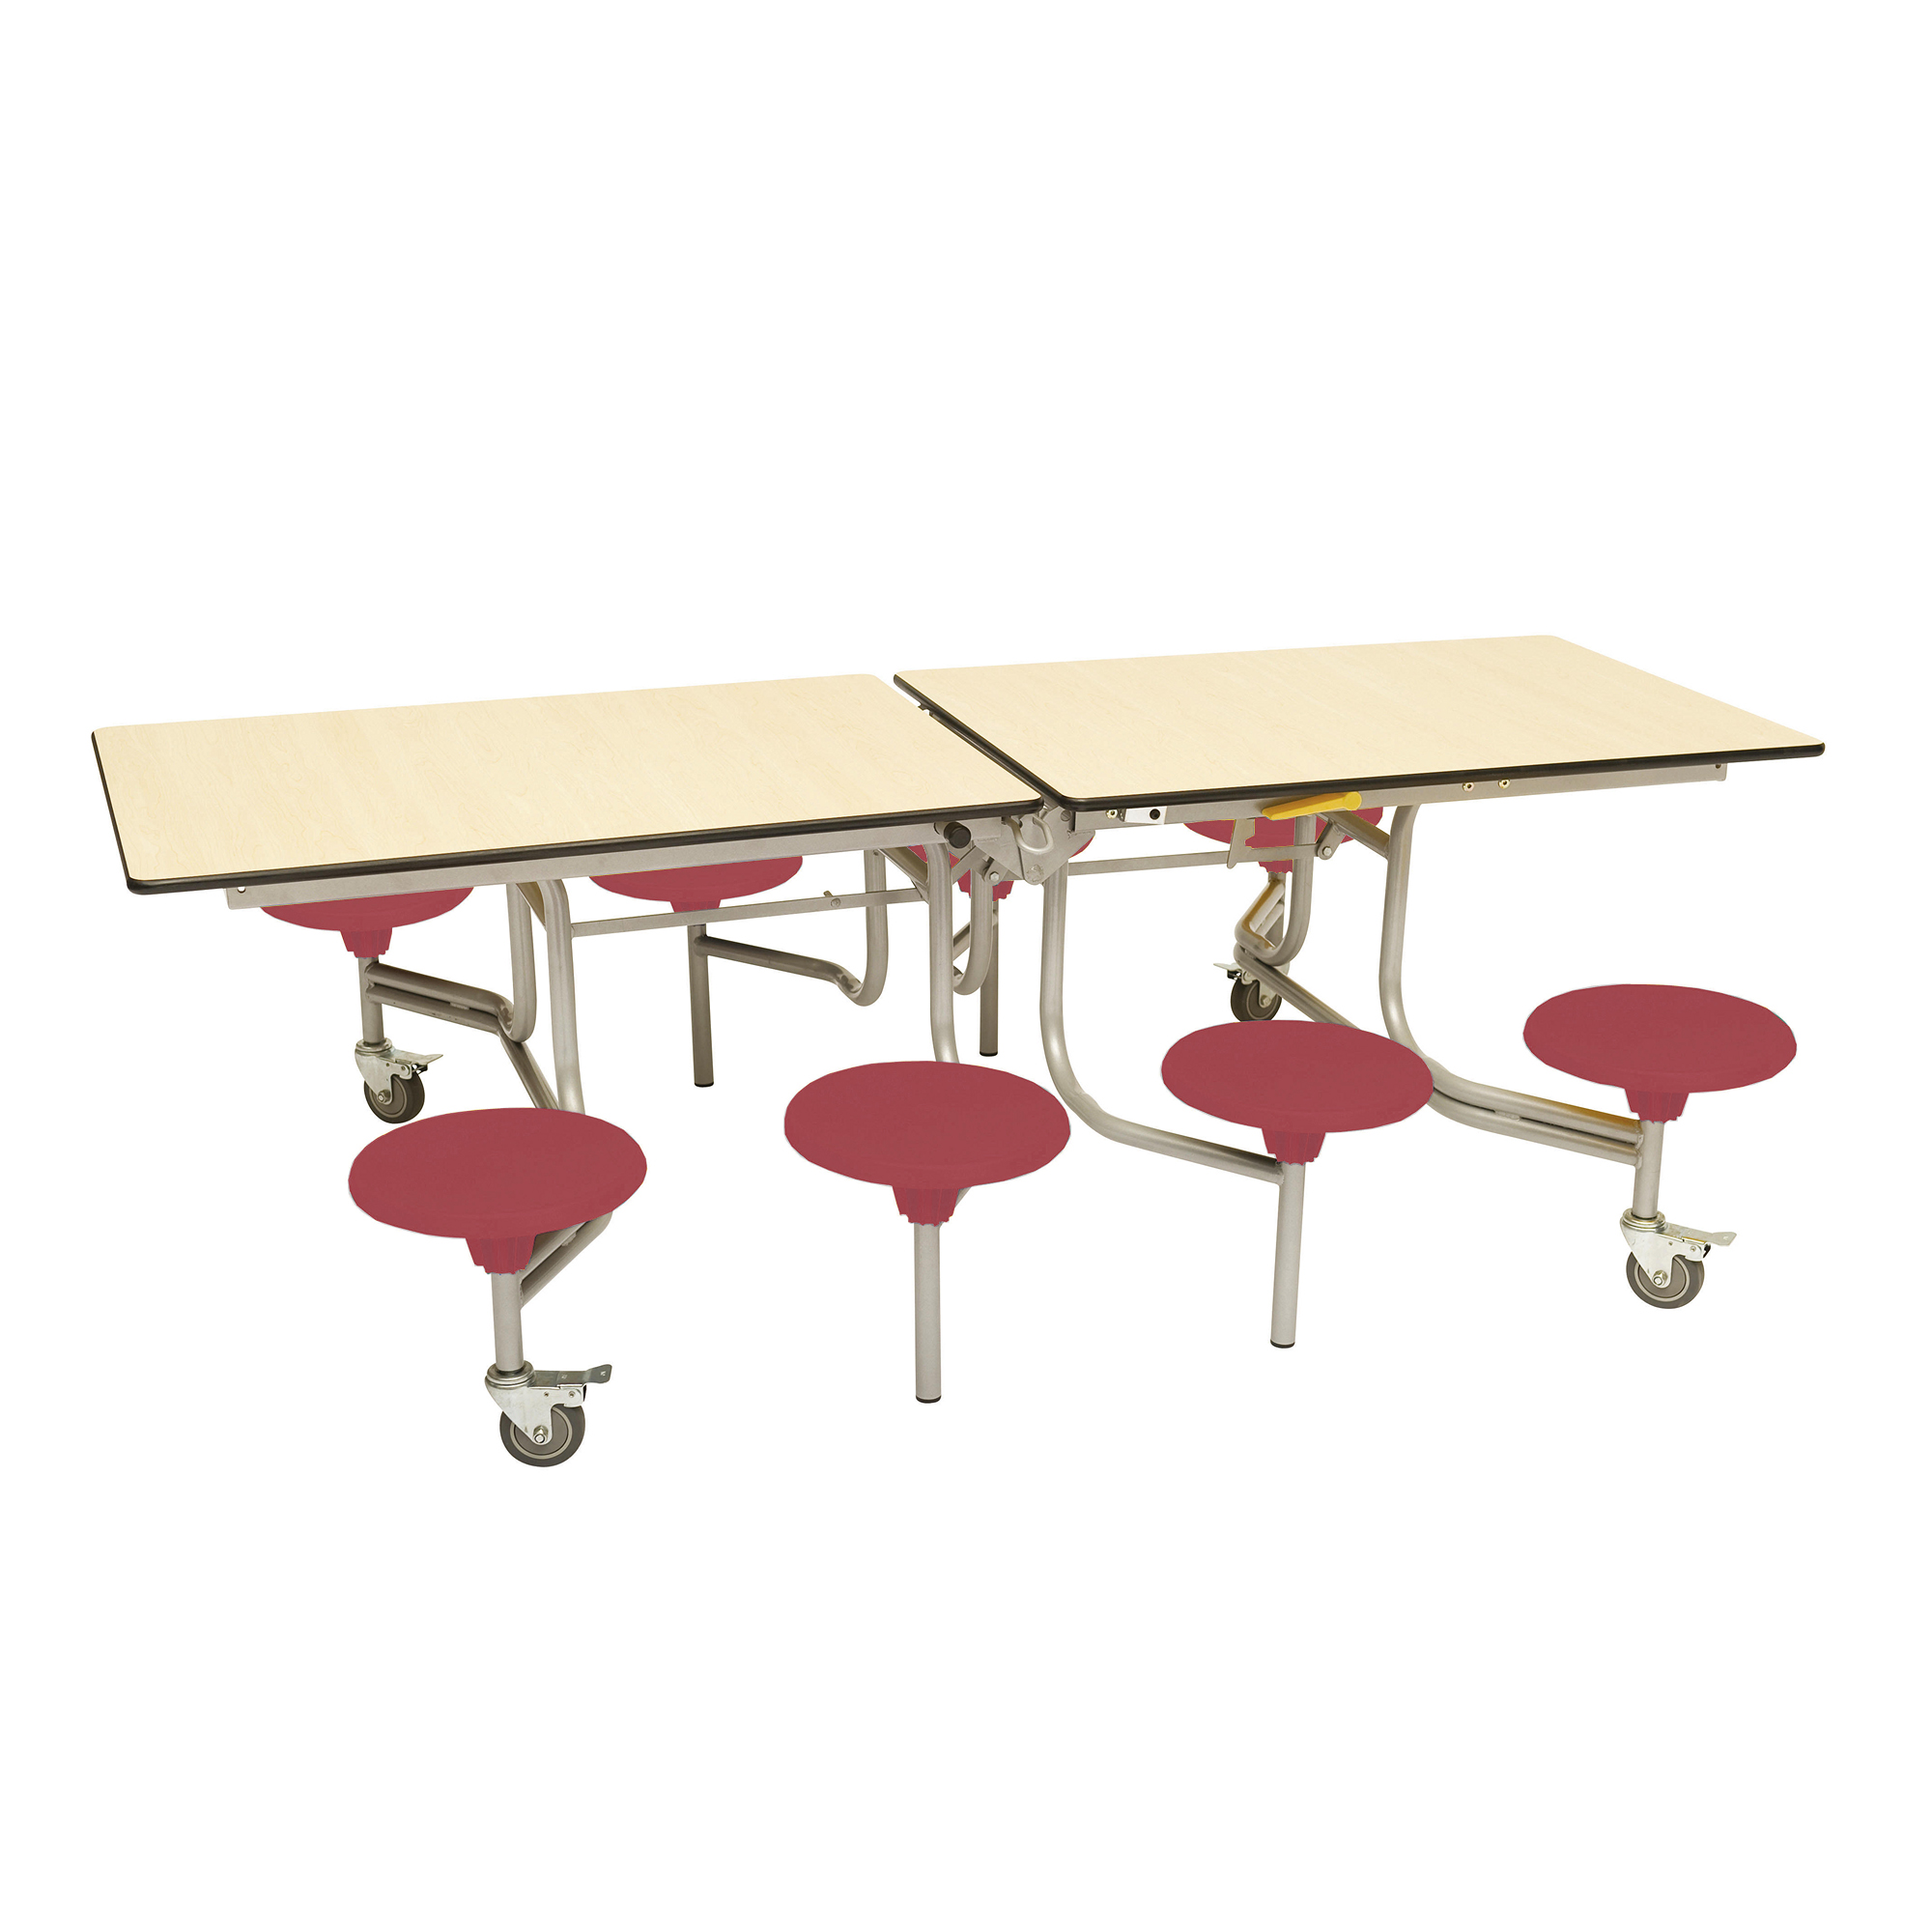 Prim Rect 8 Seat Table MpleTop Wine Seat